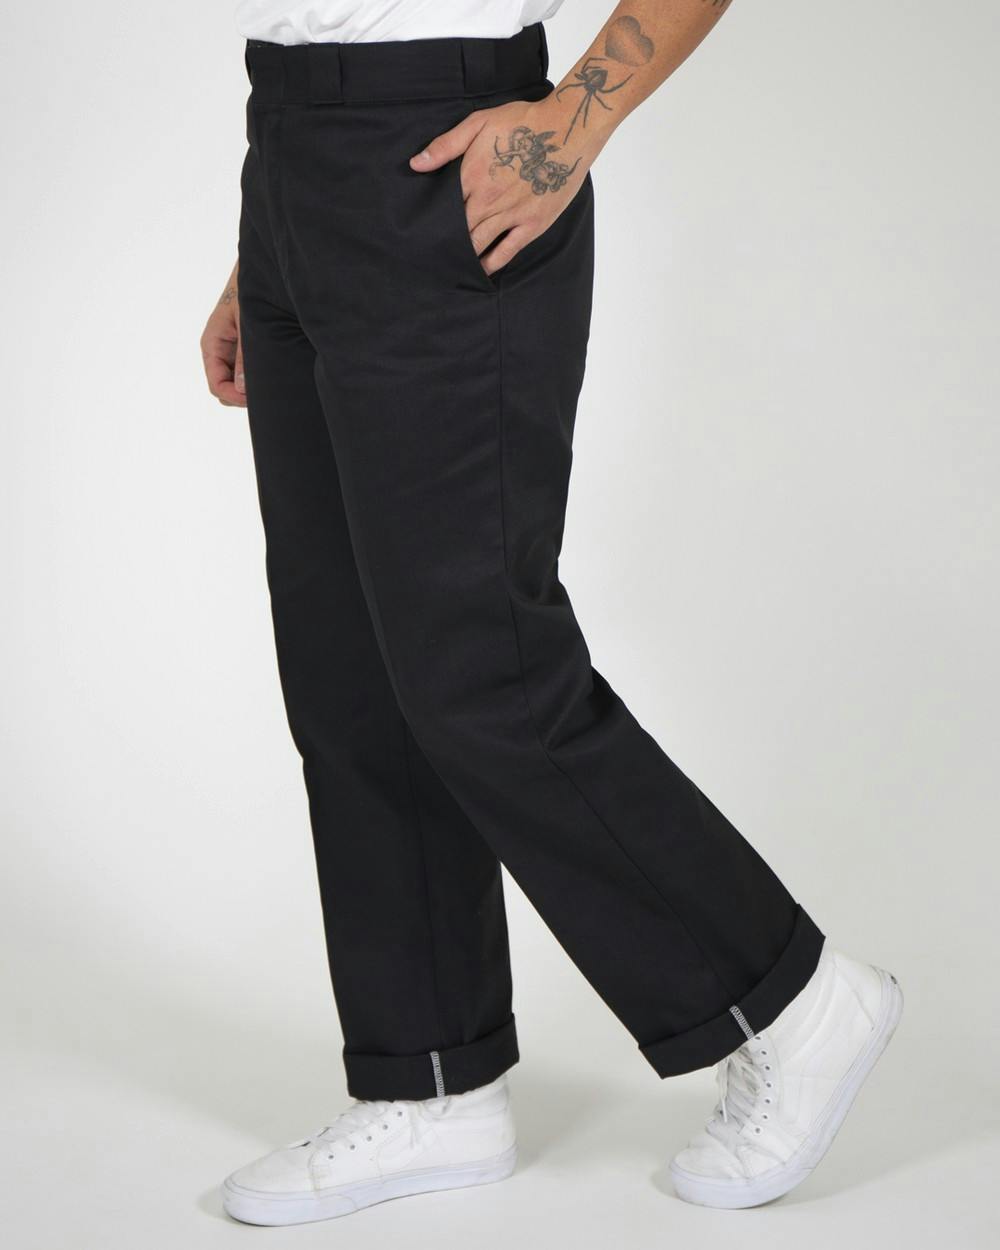 874 Original Relaxed Fit Pants by Dickies Online